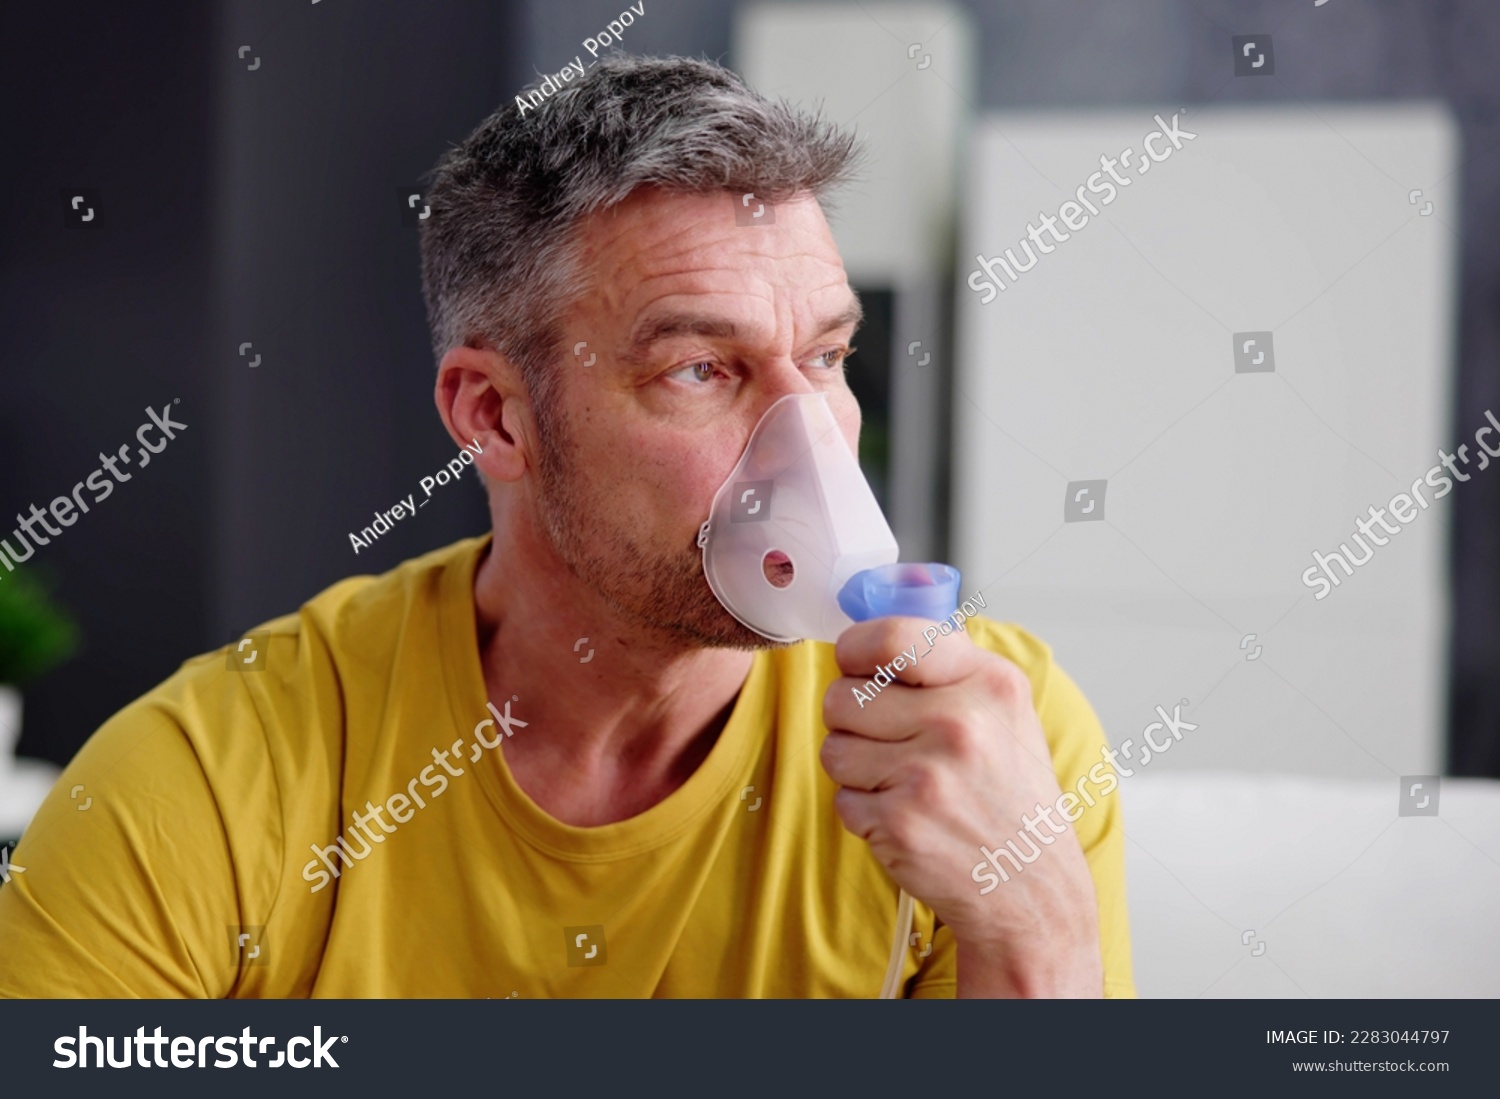 Asthma Patient Breathing Using Oxygen Mask And COPD Nebulizer #2283044797